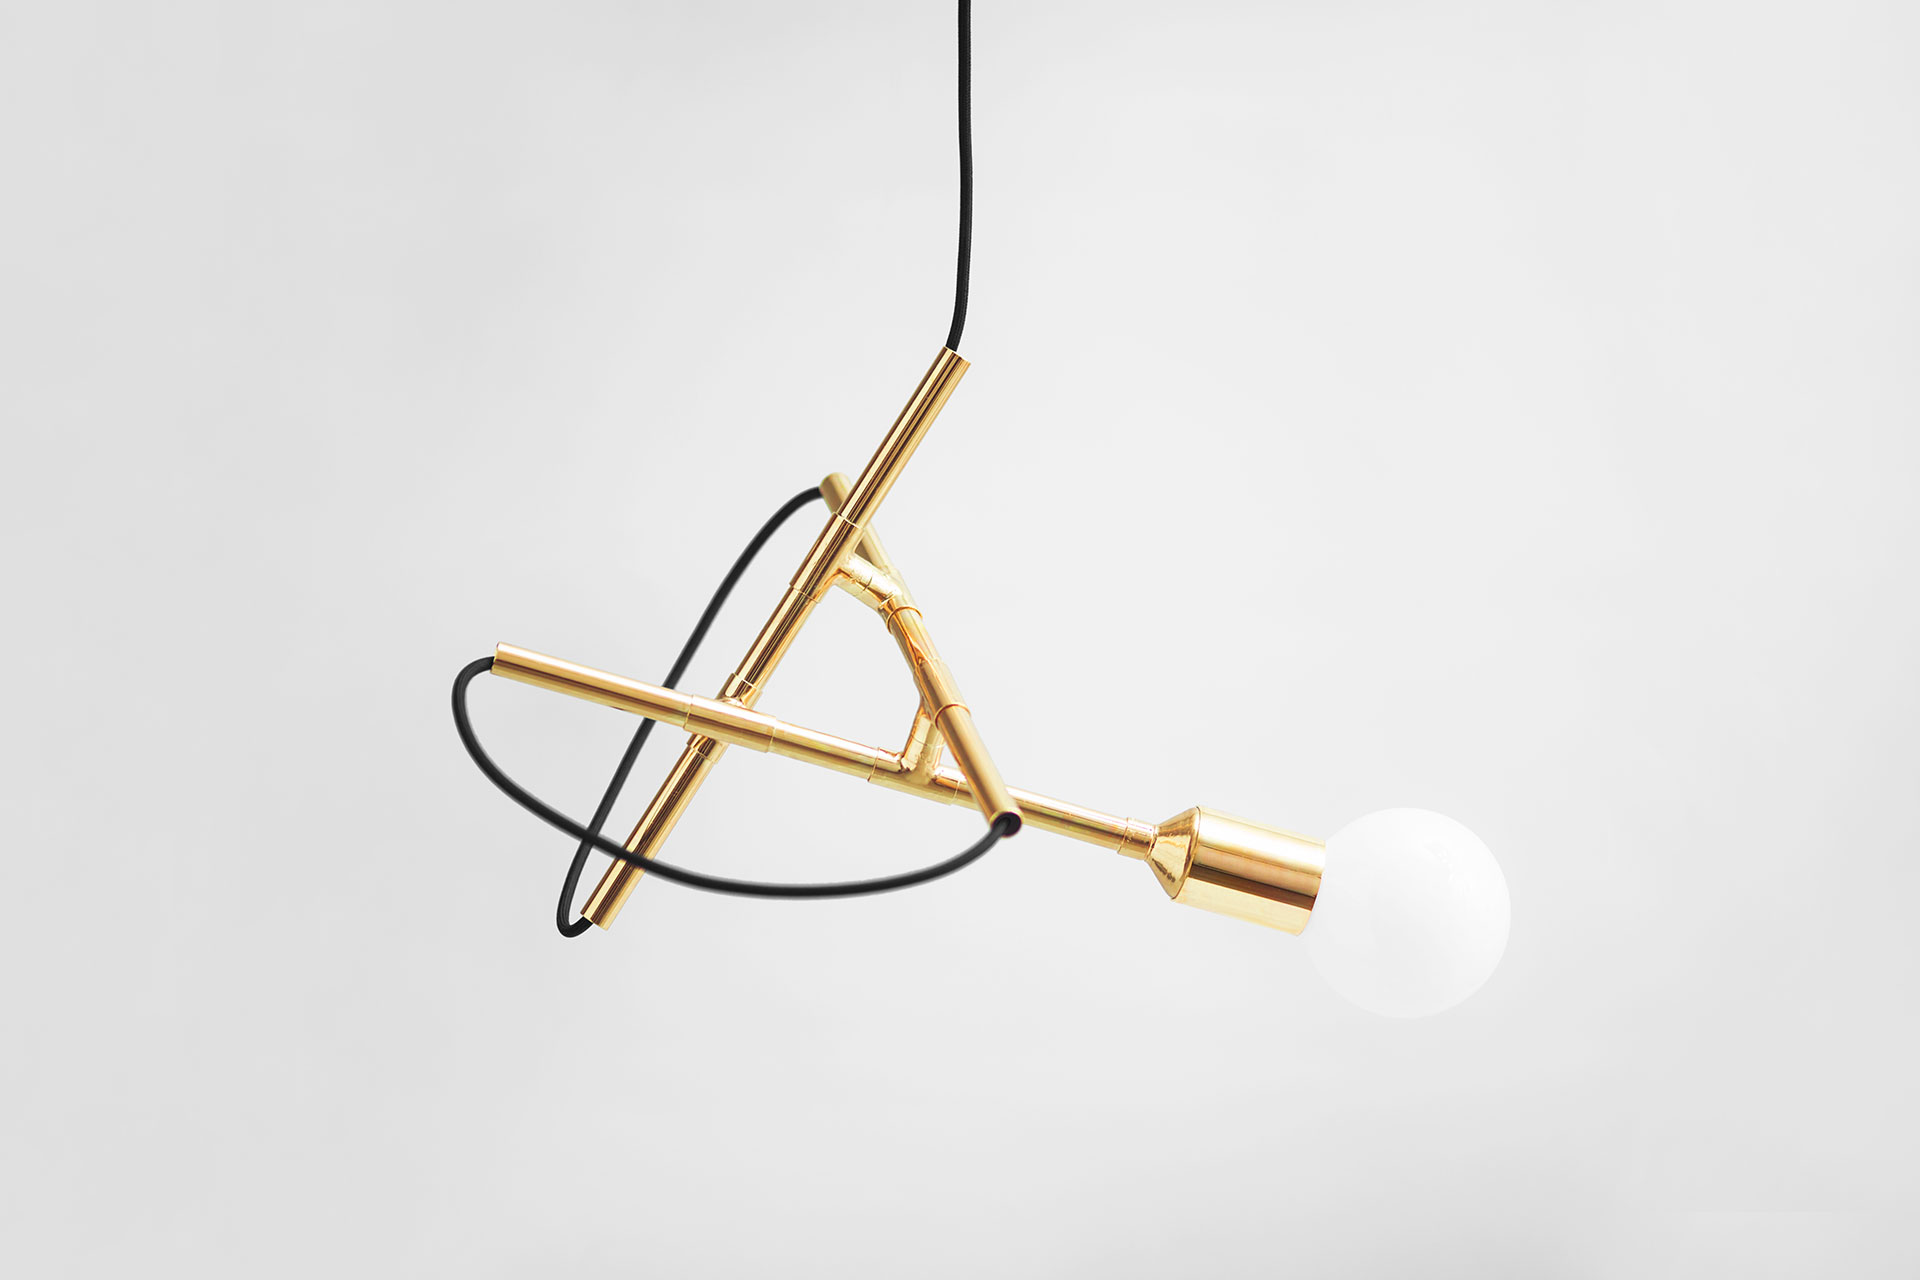 Unique pendant lamp in trendy brass inspired by mid-century modern design